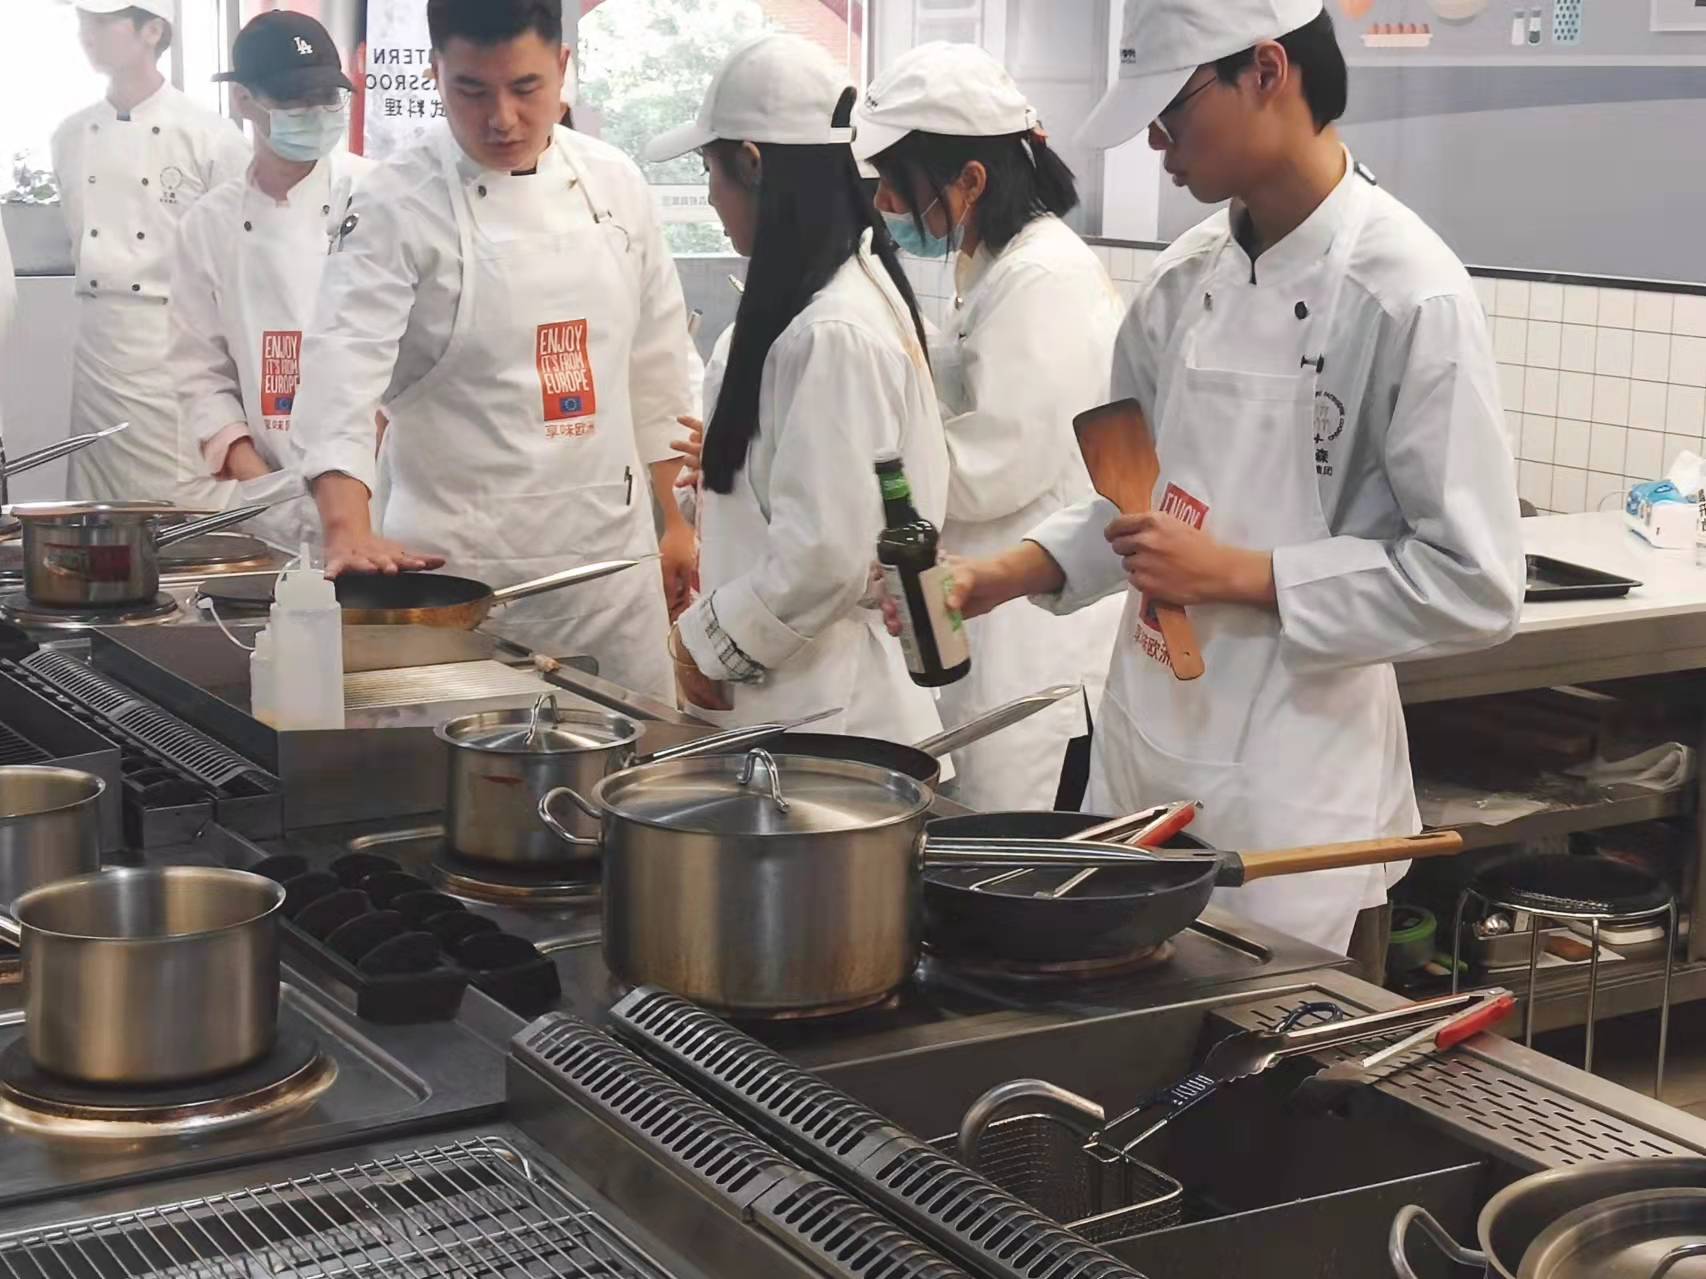 Students cooking together with teacher 